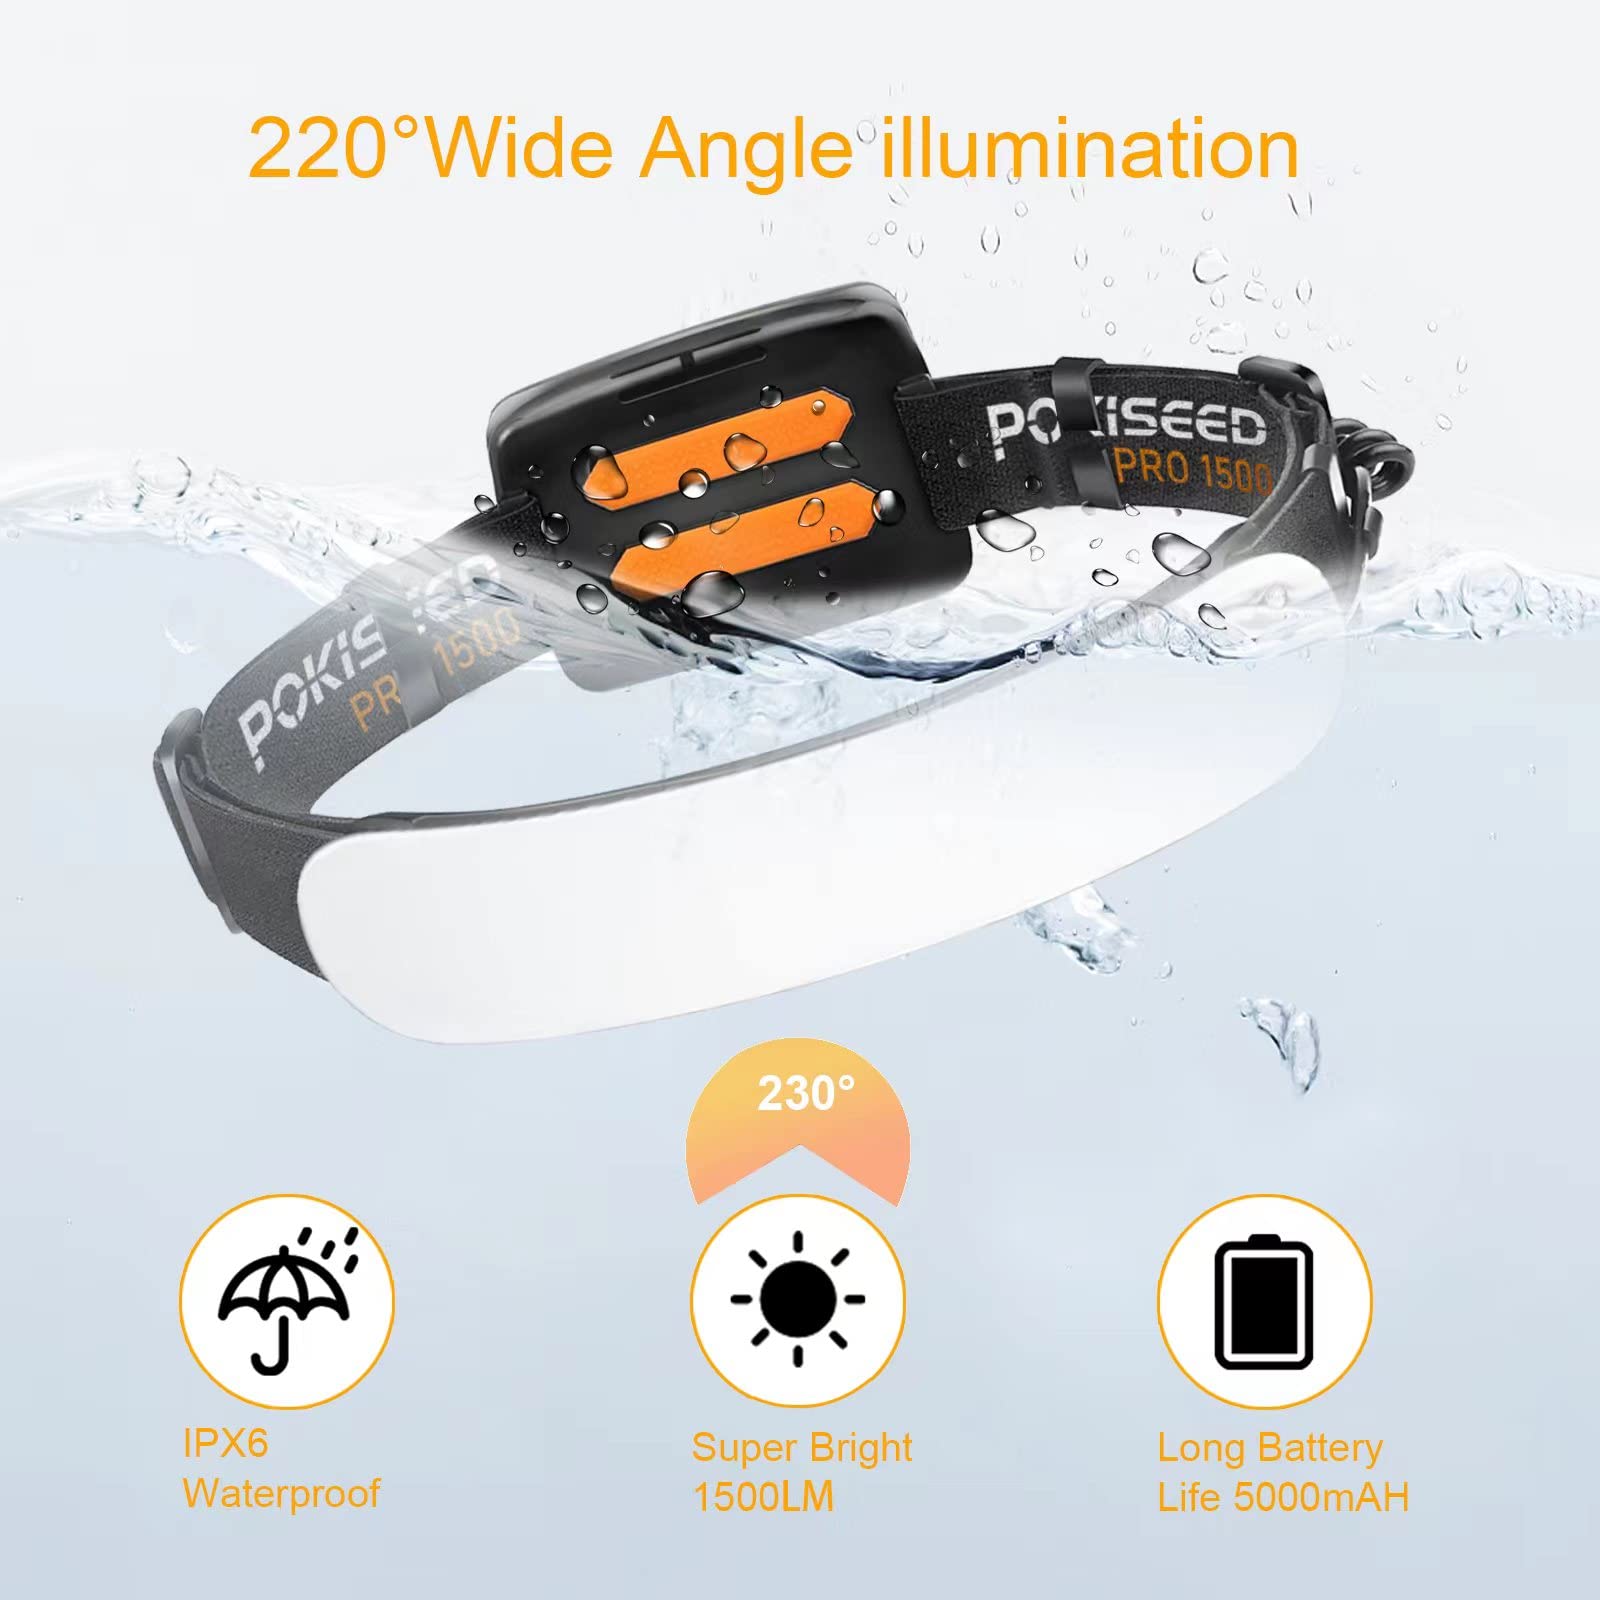 1500 Lumens Rechargeable LED Headlamp with 230° Beam, 3 Modes, IPX6 Waterproof - For Camping, Running, Fishing, Hard Hat Work